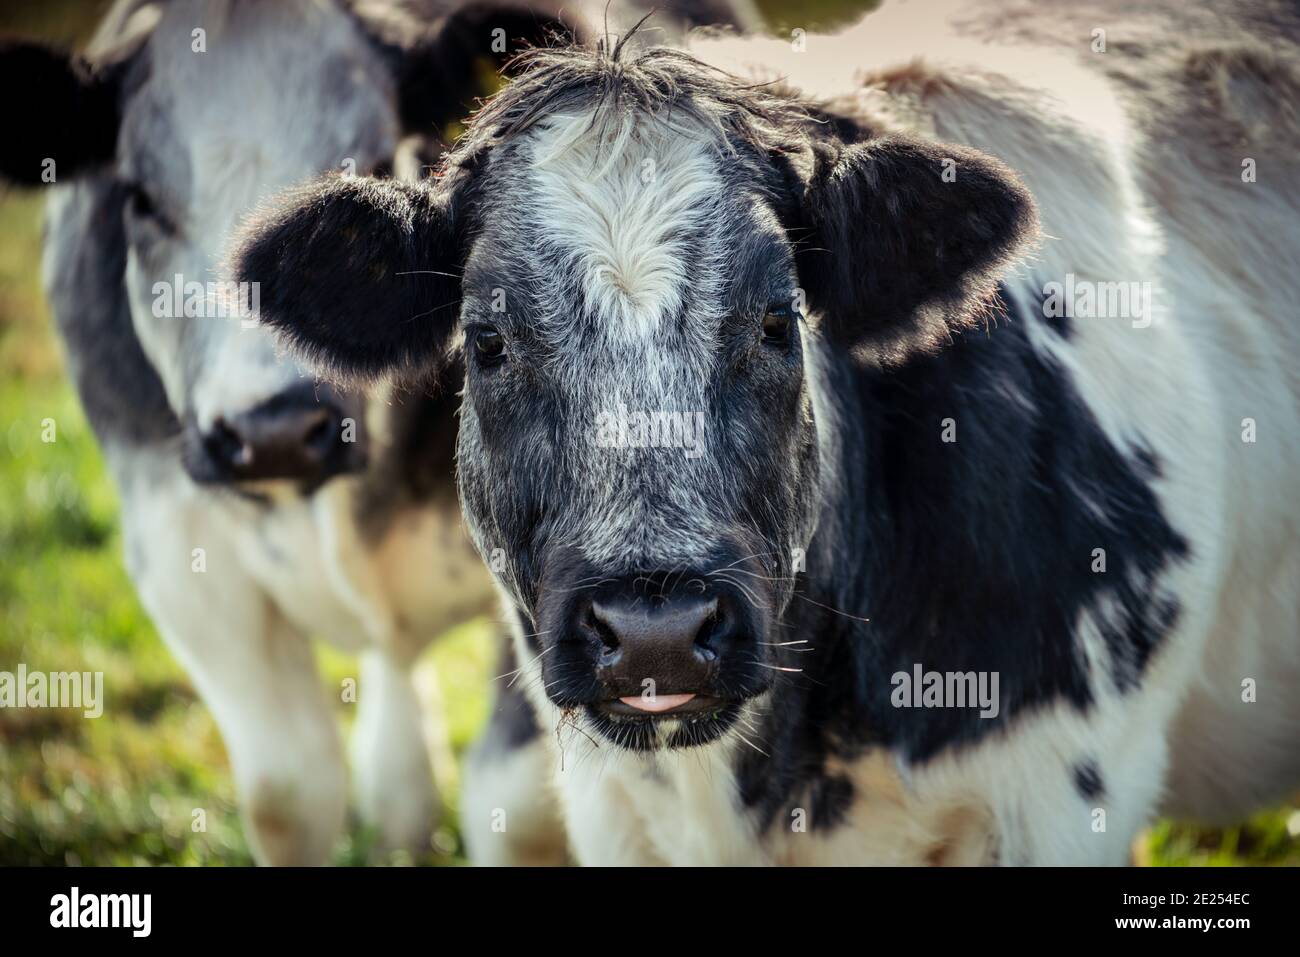 Sweet looking grey and a white shaggy cow with tongue hanging out staring into the camera lens looking a little stupid. Stock Photo